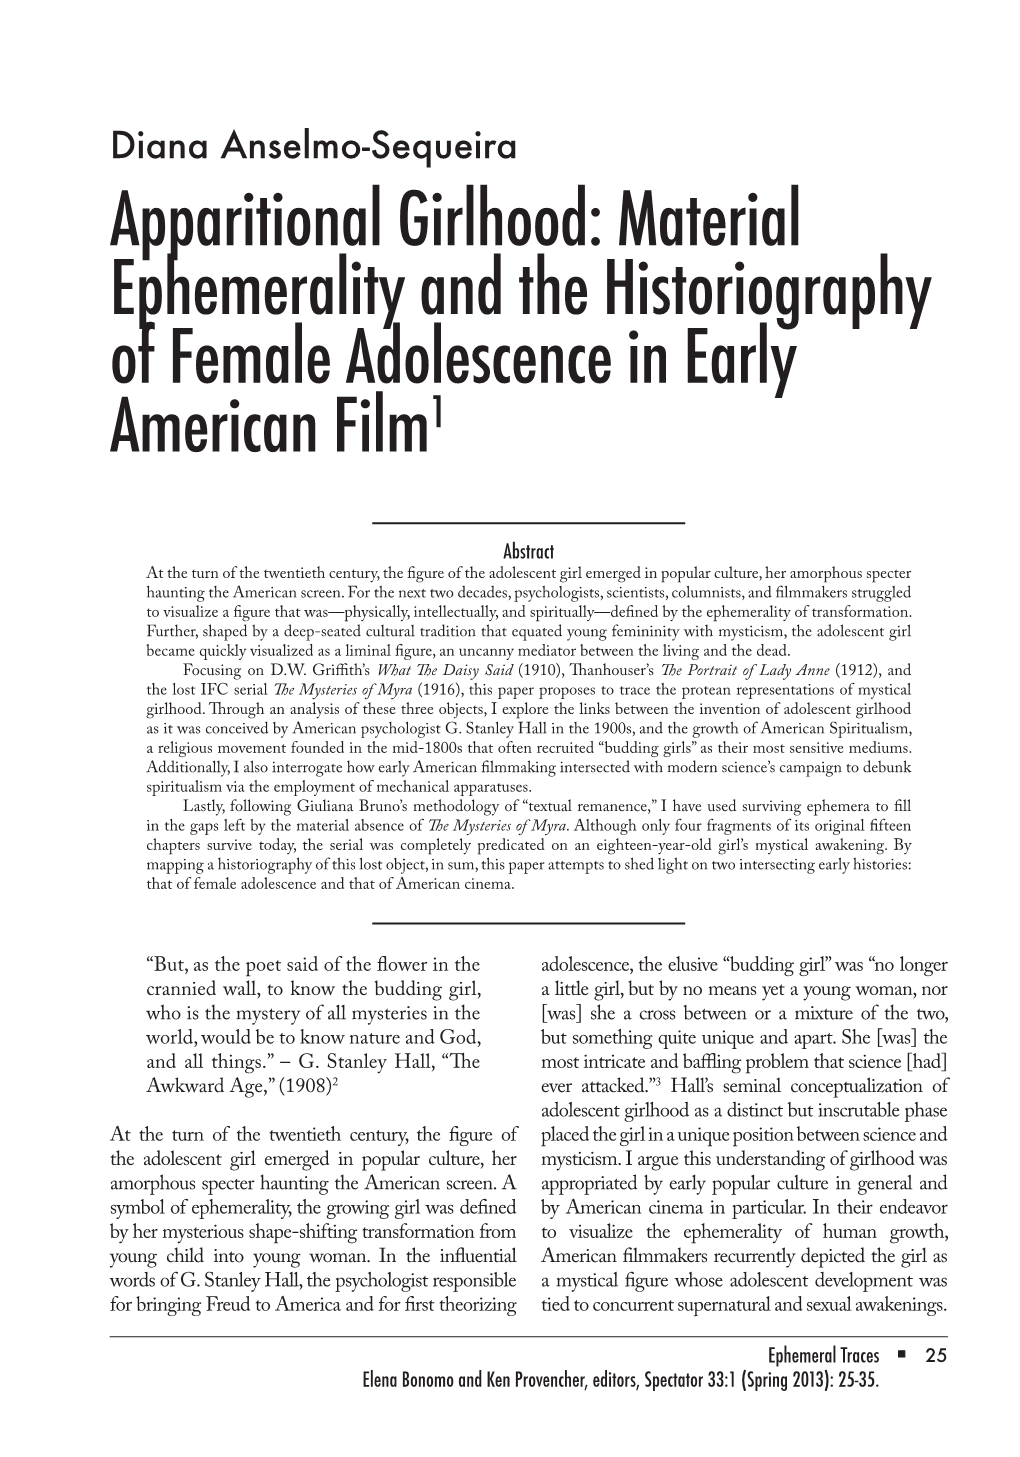 Apparitional Girlhood: Material Ephemerality and the Historiography of Female Adolescence in Early American Film1